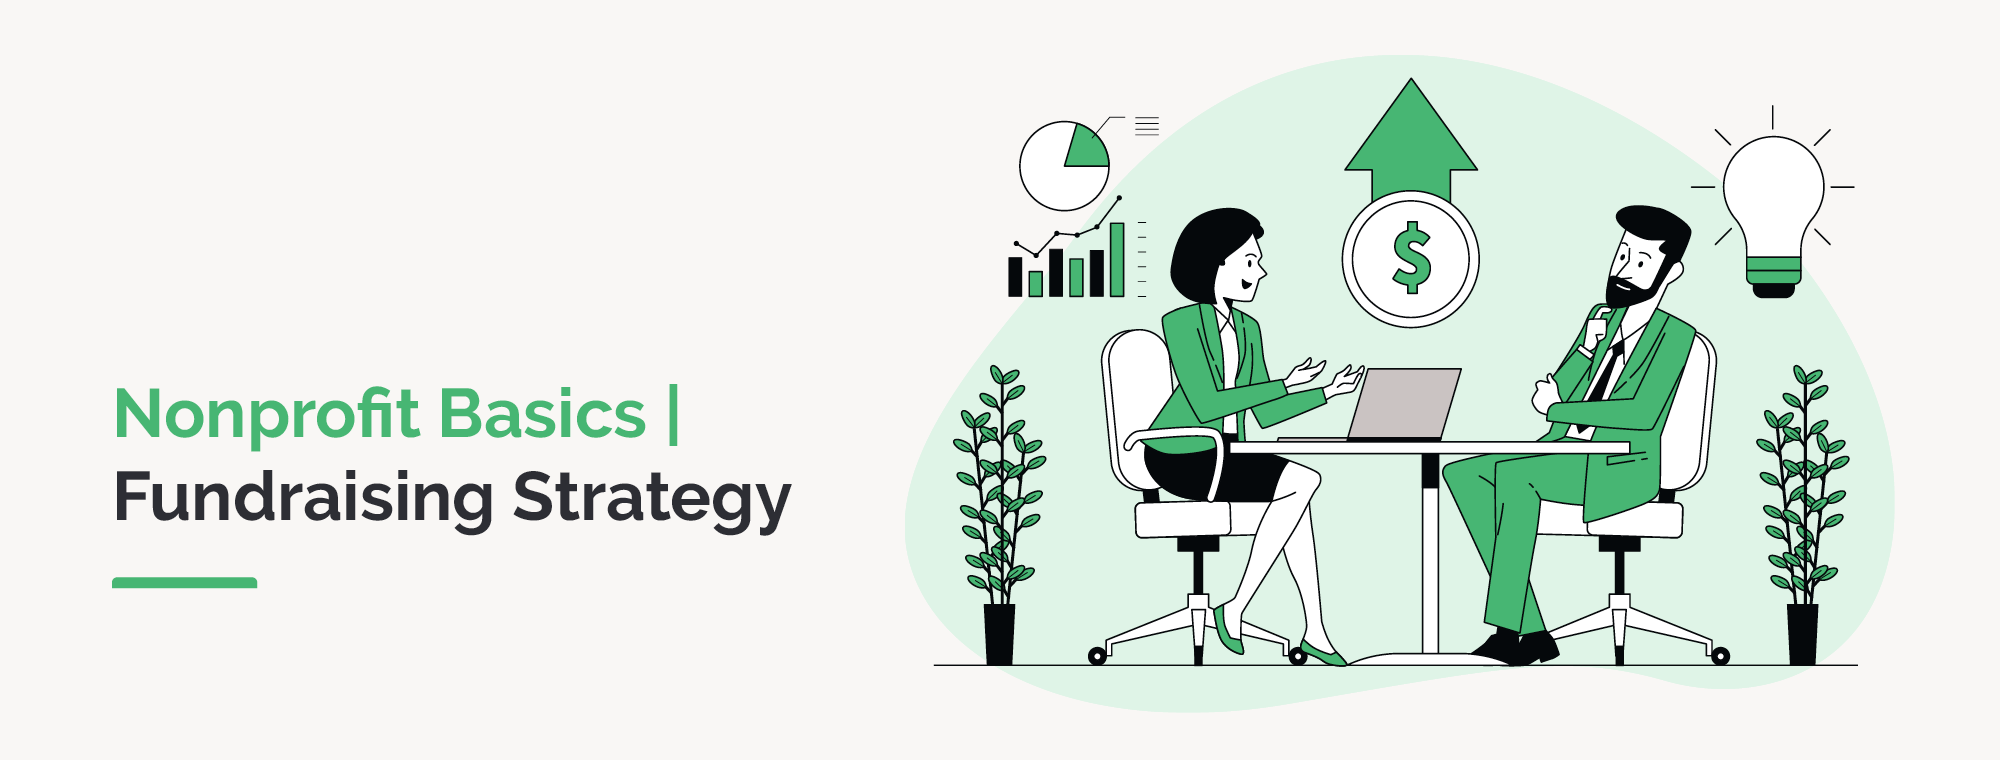 A strong fundraising strategy can help your nonprofit create a sustainable fundraising program and lead successful fundraising campaigns.